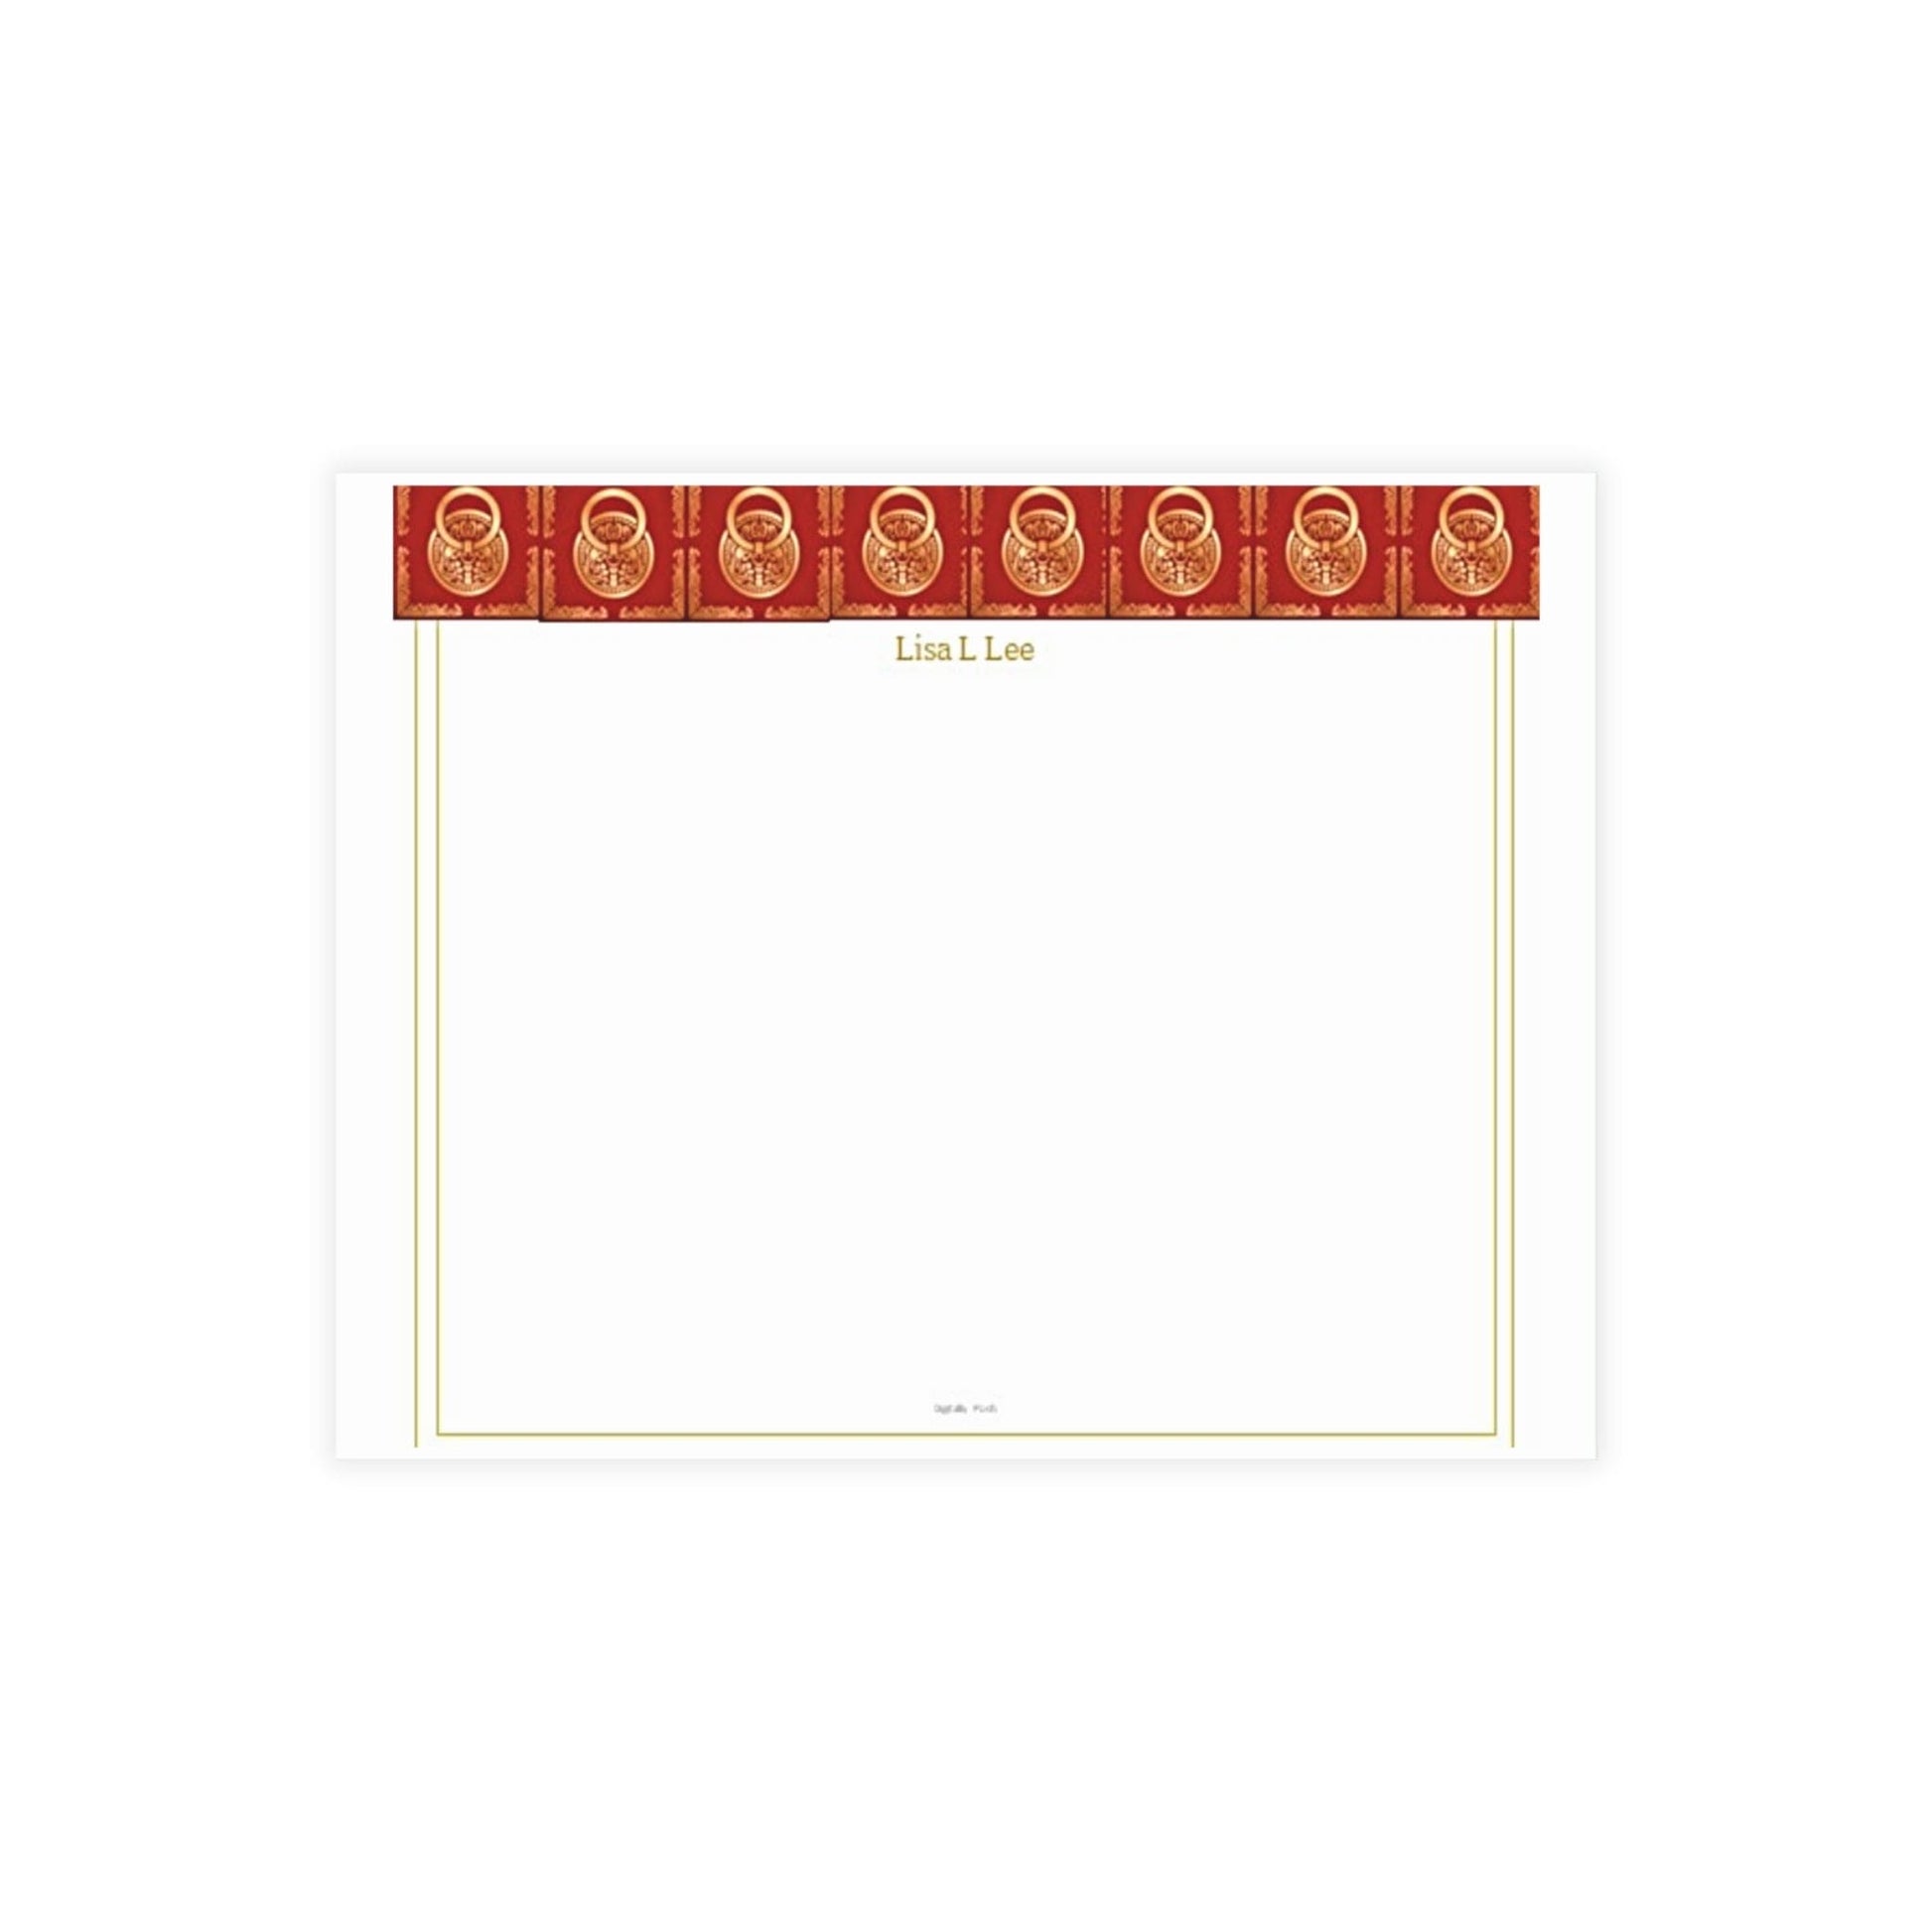 Personalized Note Card: Add a Personal Touch with Customized Stationery for Every Occasion. Door Knocker Notecard Bundles (envelopes included)